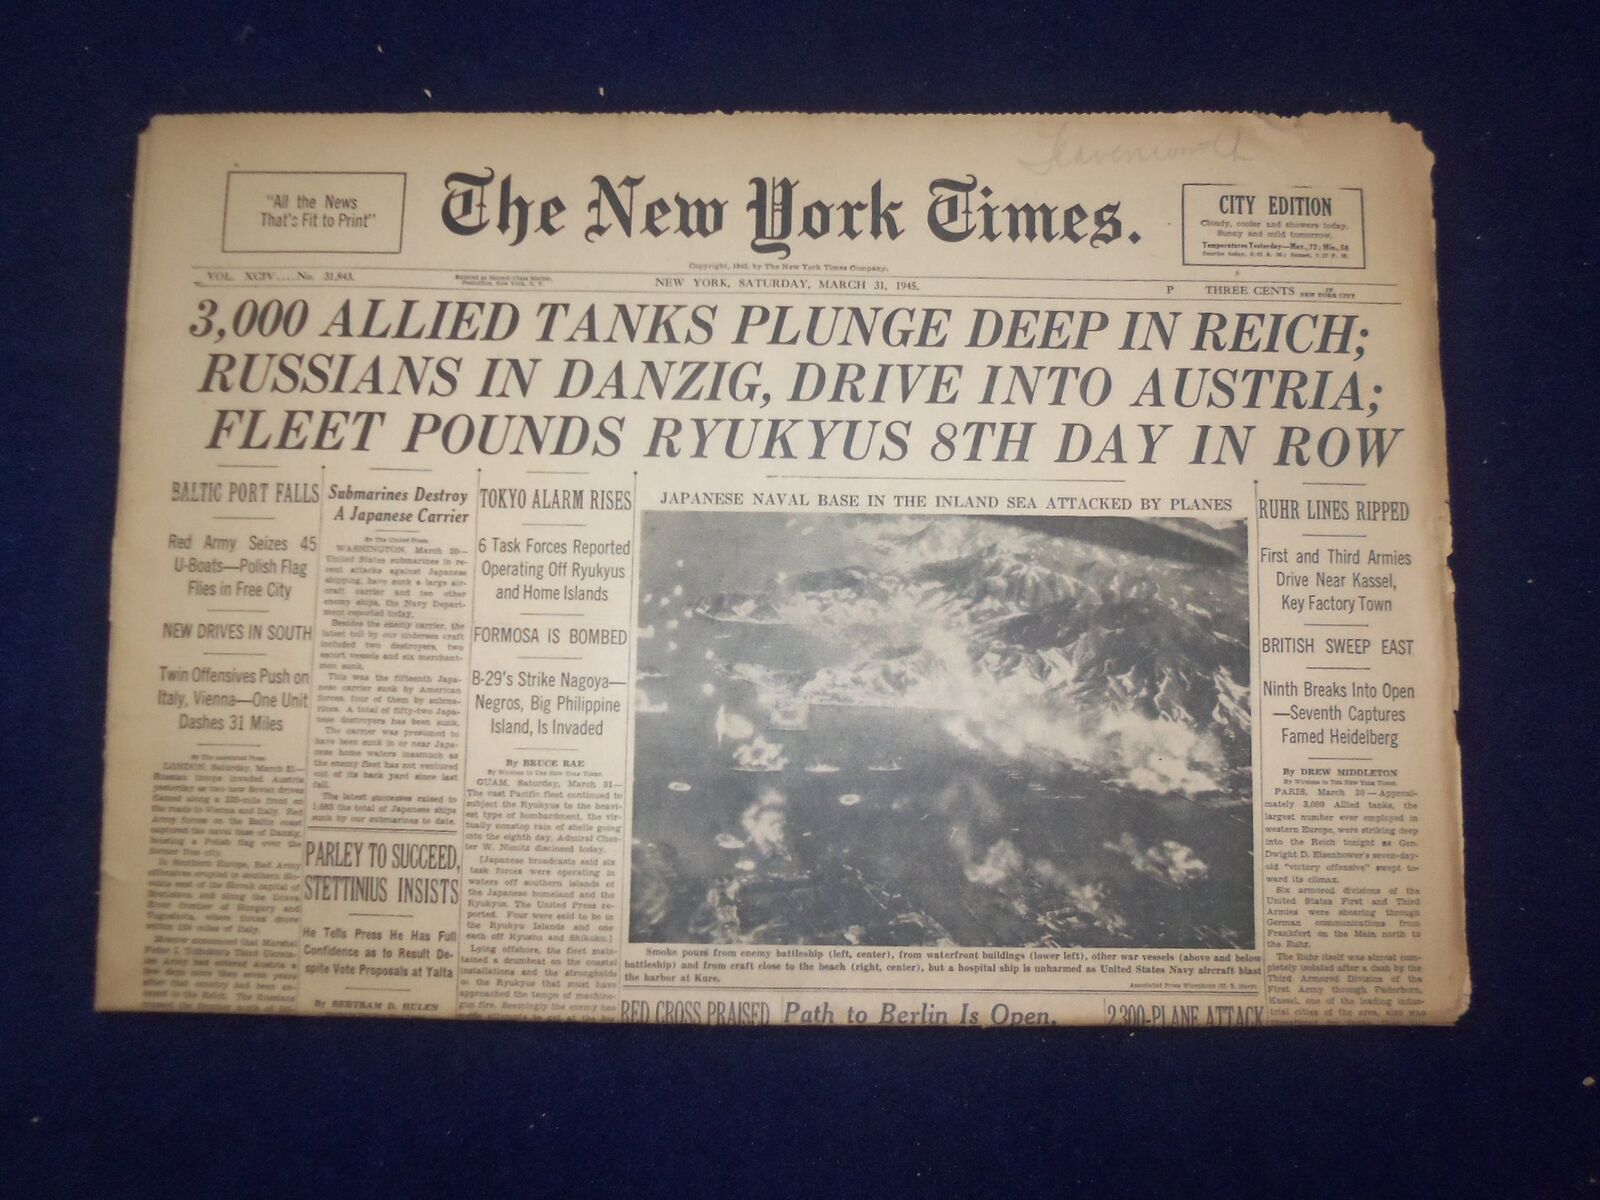 1945 MARCH 31 NEW YORK TIMES - 3,000 ALLIED TANKS PLUNGE DEEP IN REICH - NP 6682